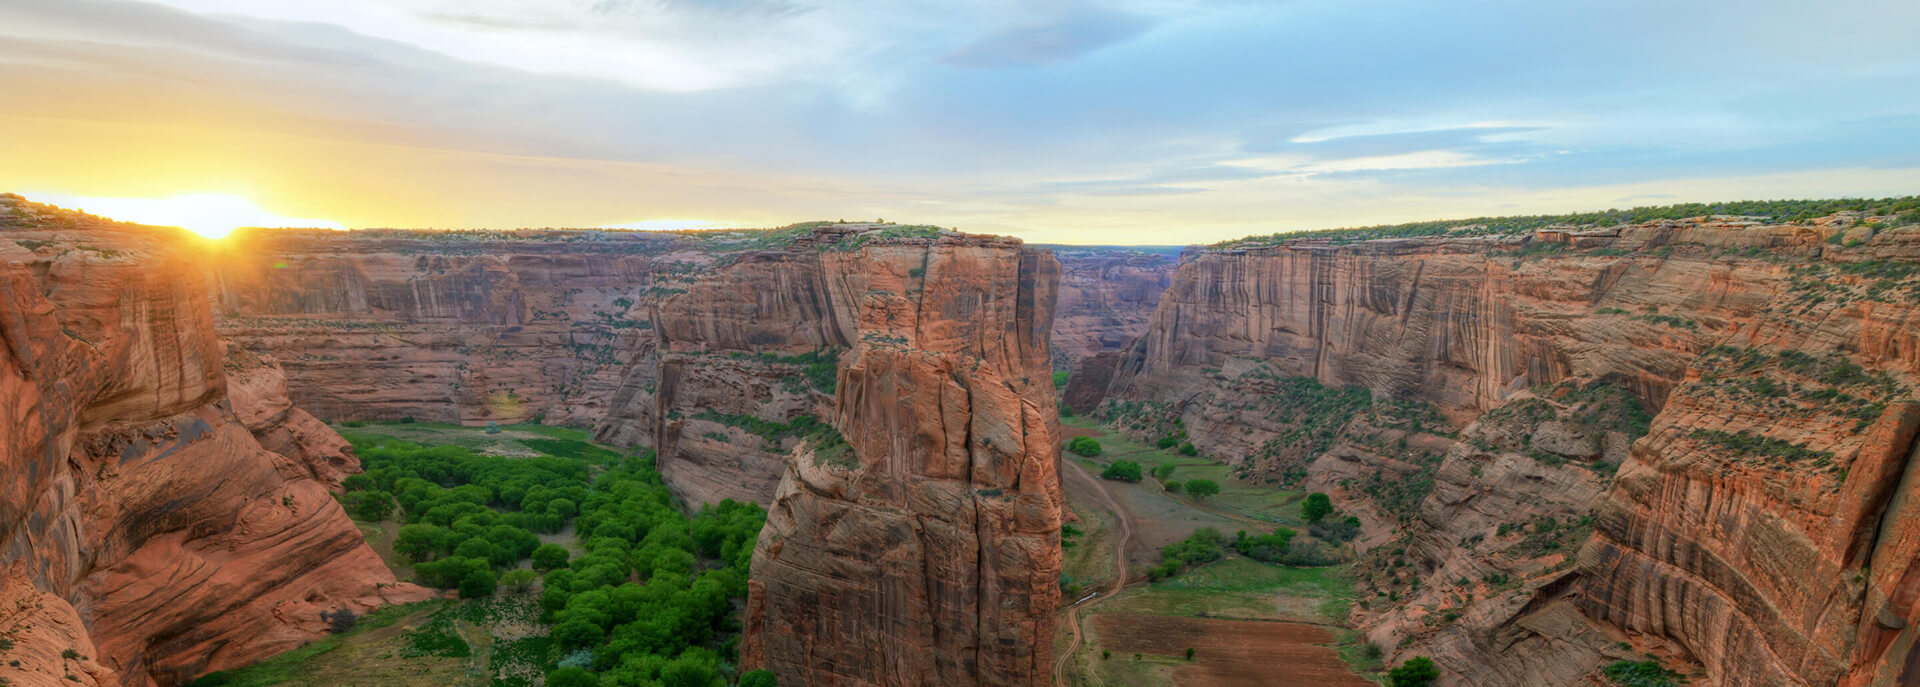 interior Western National Parks Association Accepting Nominations and Applications for Annual Awards, Grants & Scholarships Starting October 2 banner image